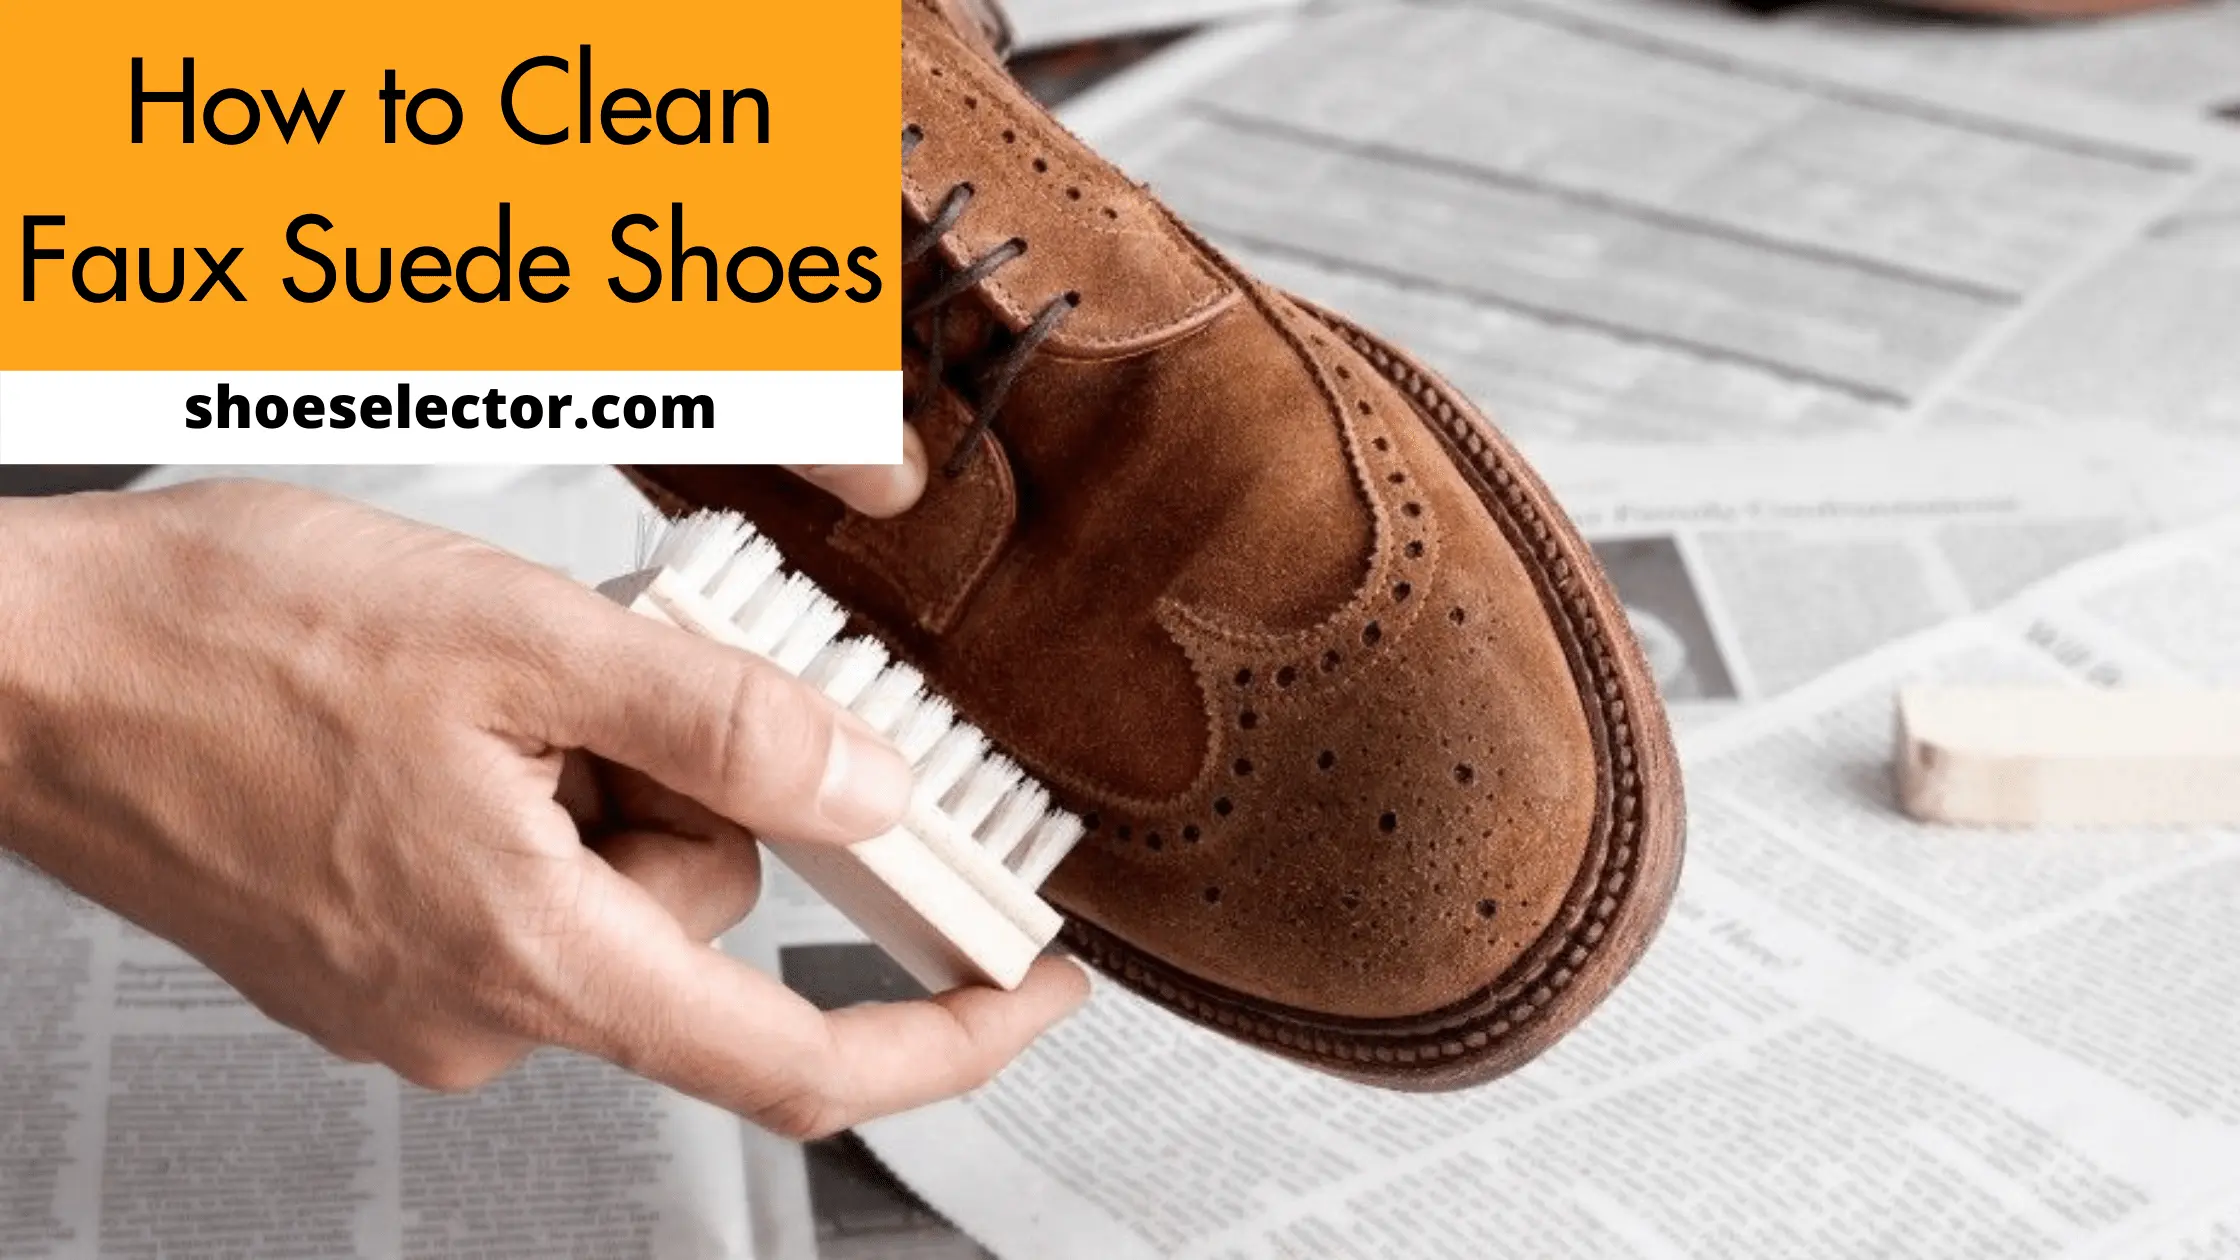 How to Clean Faux Suede Shoes? - Recommended Guide